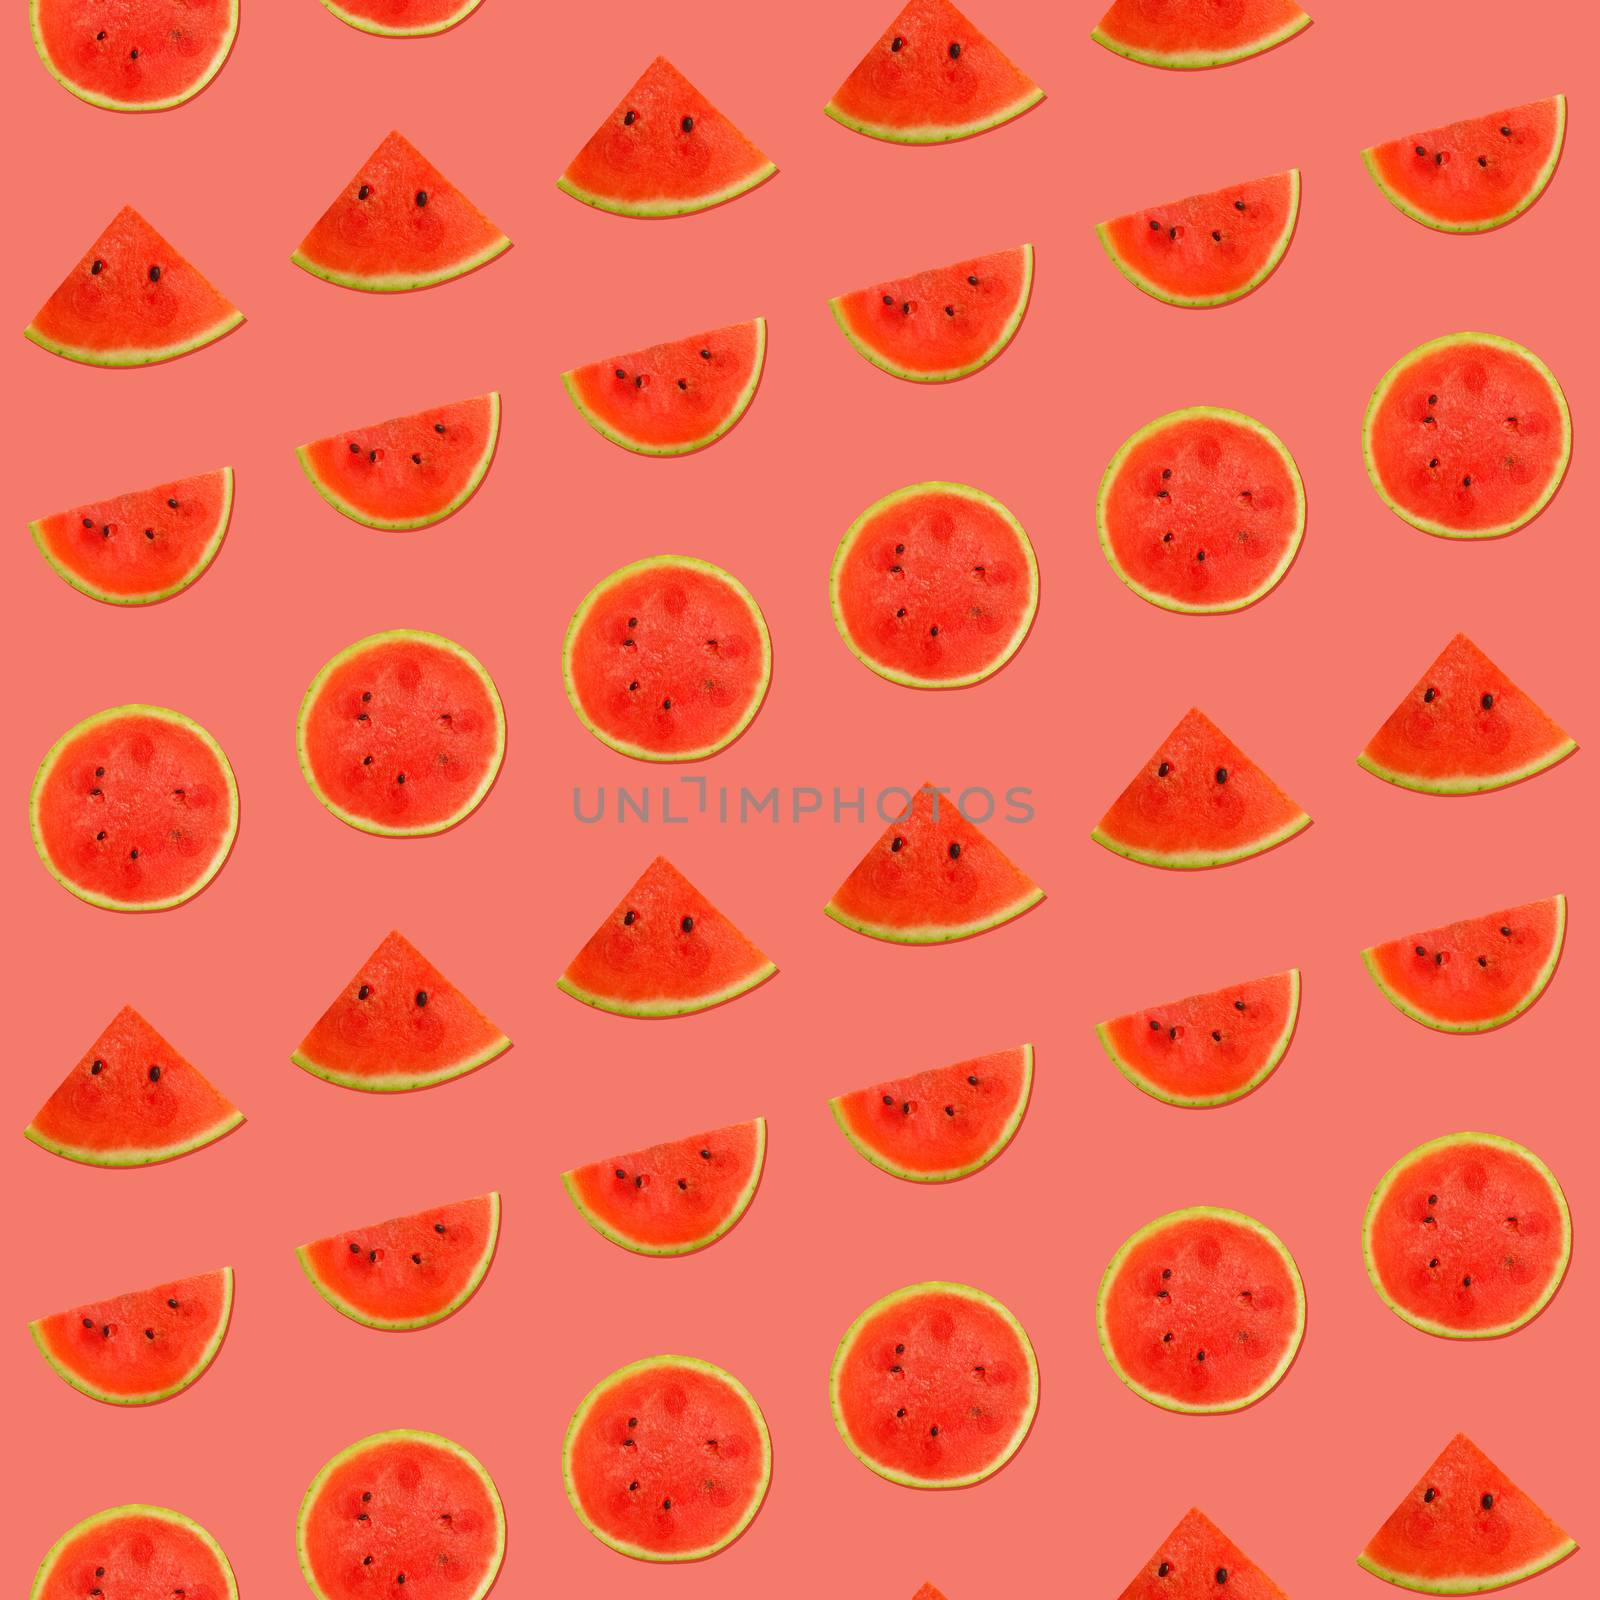 Seamless pattern of fresh red ripe juicy watermelon round cut wedges on vivid coral pink background